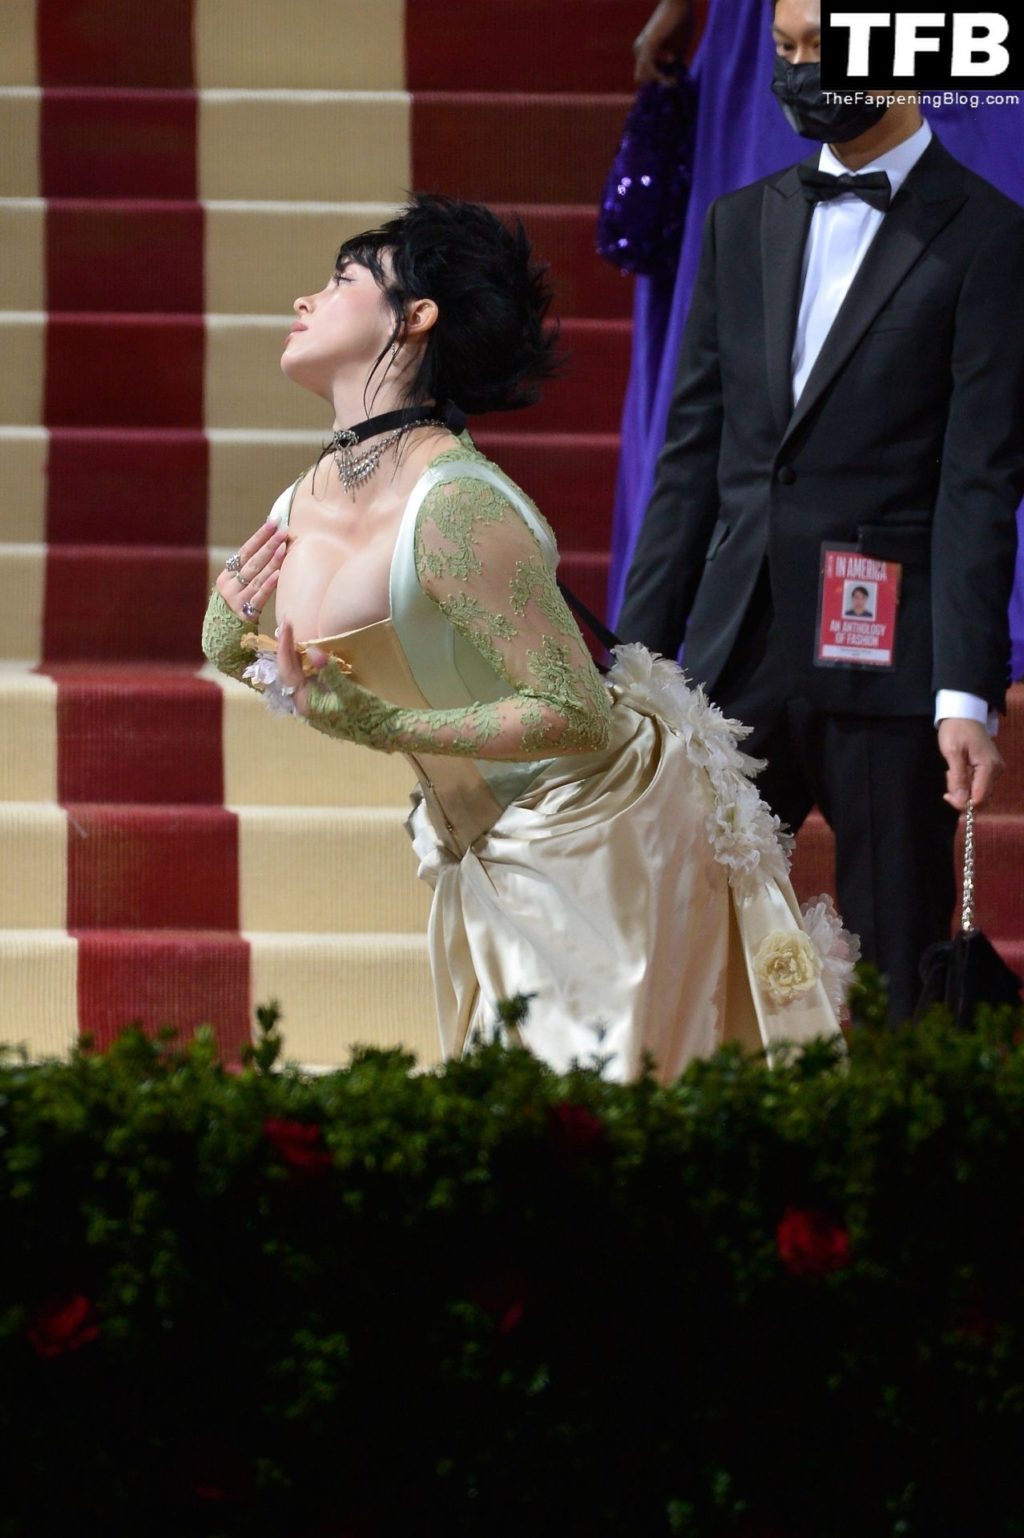 Billie Eilish Sexy The Fappening Blog 86 1024x1538 - Billie Eilish Showcases Nice Cleavage at The 2022 Met Gala in NYC (155 Photos)